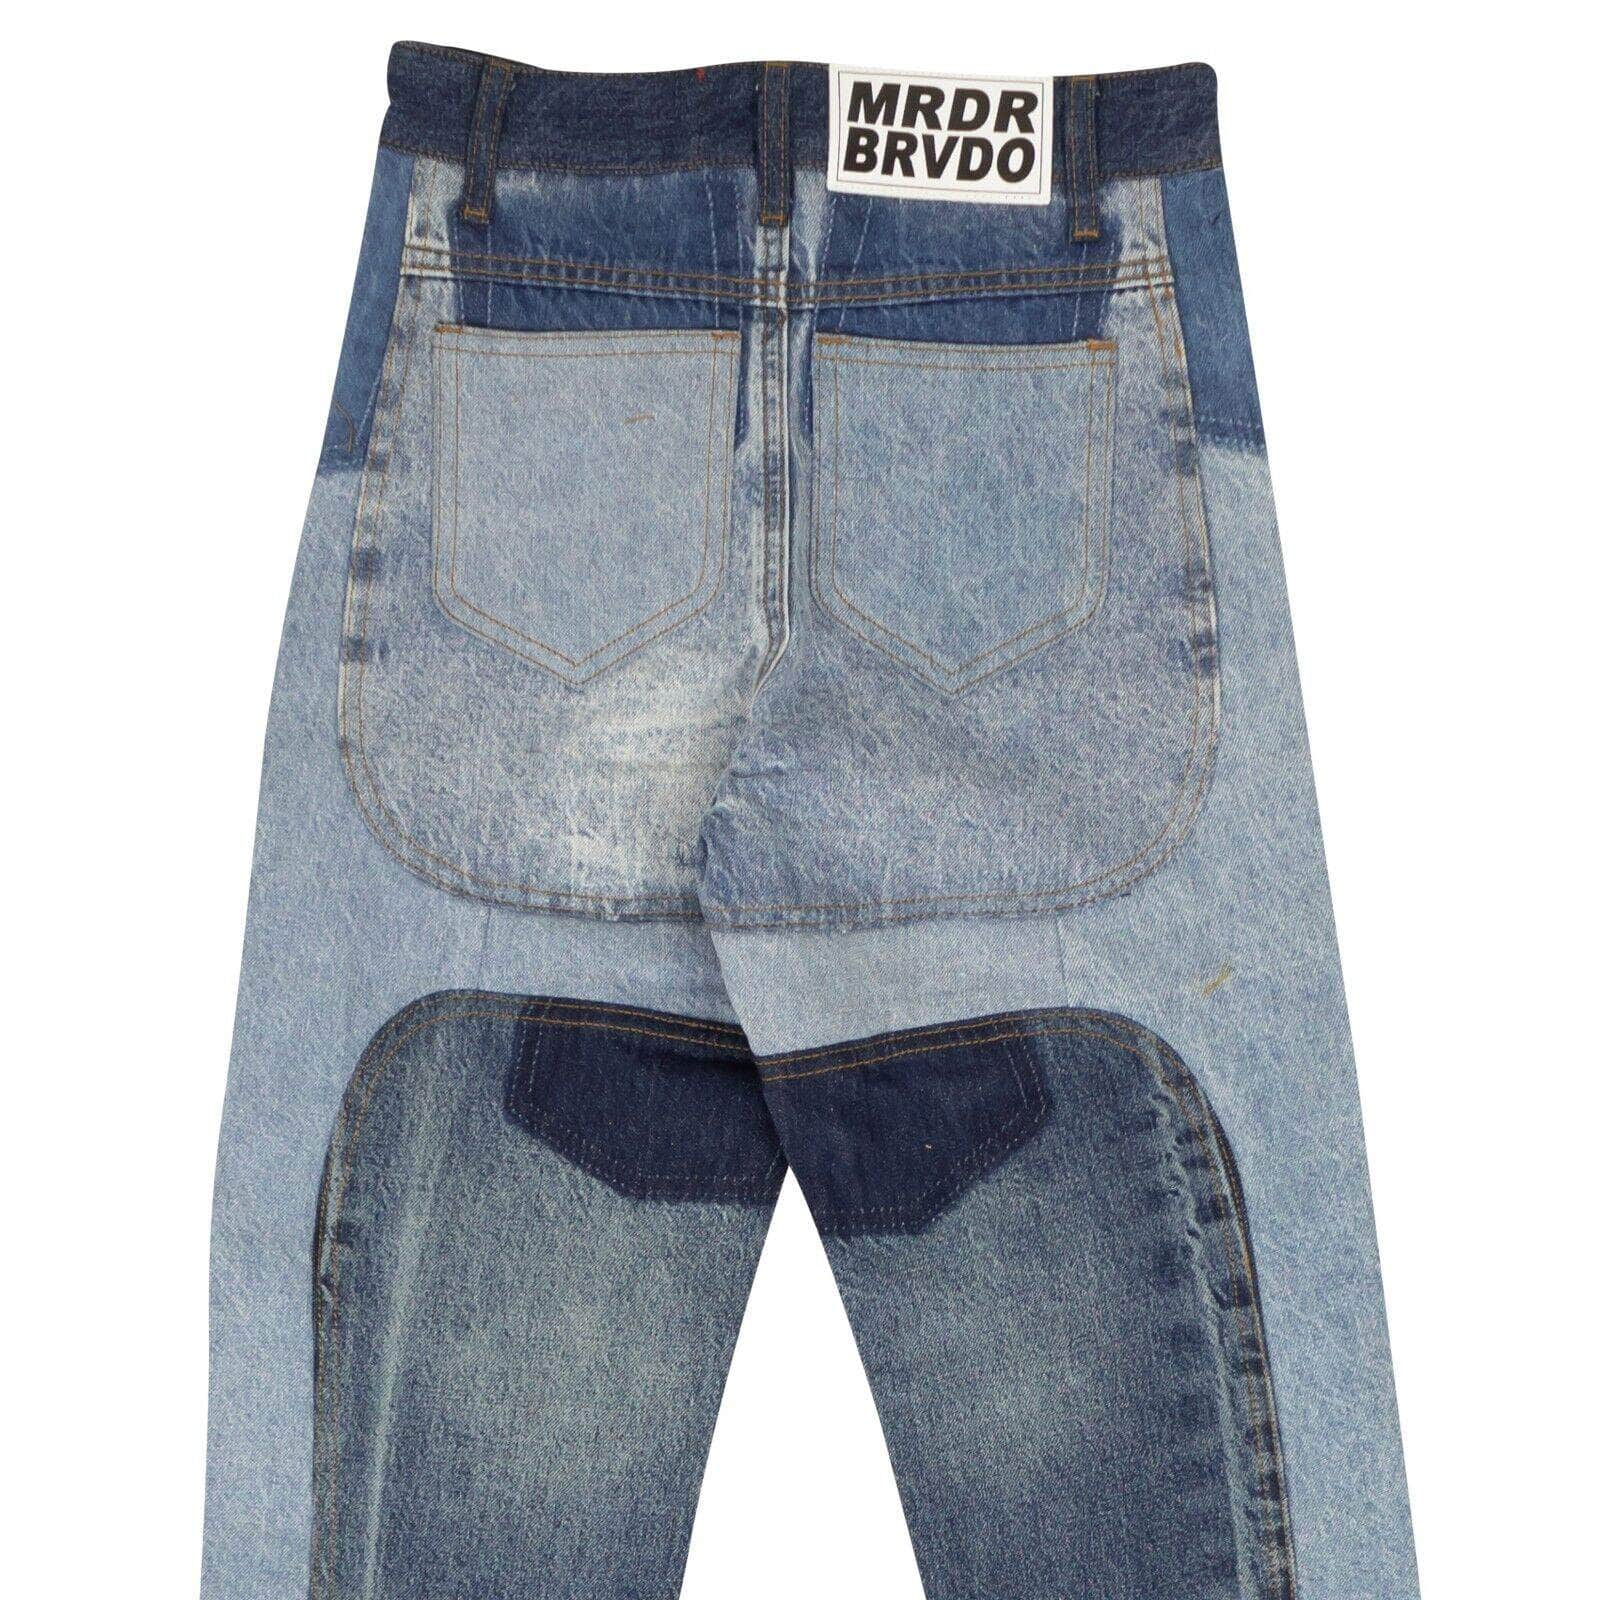 Who Decides War 500-750, channelenable-all, chicmi, couponcollection, gender-mens, main-clothing, mens-shoes, mens-straight-fit-jeans, size-24, size-26, size-28, size-30, who-decides-war Indigo Upcycled Patchwork Denim Jeans